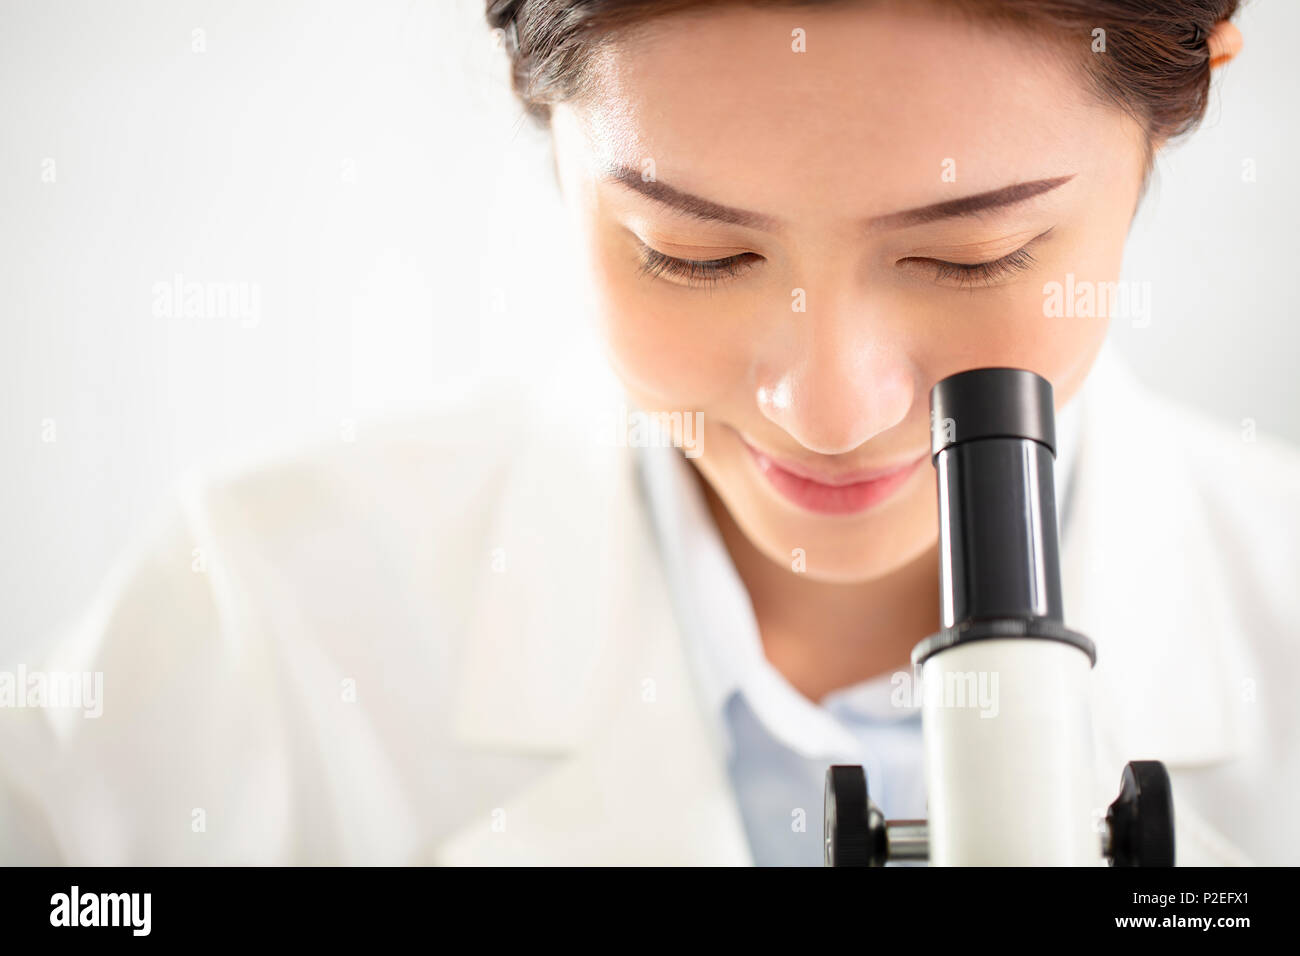 female medical or scientific researcher watching the microscope Stock Photo